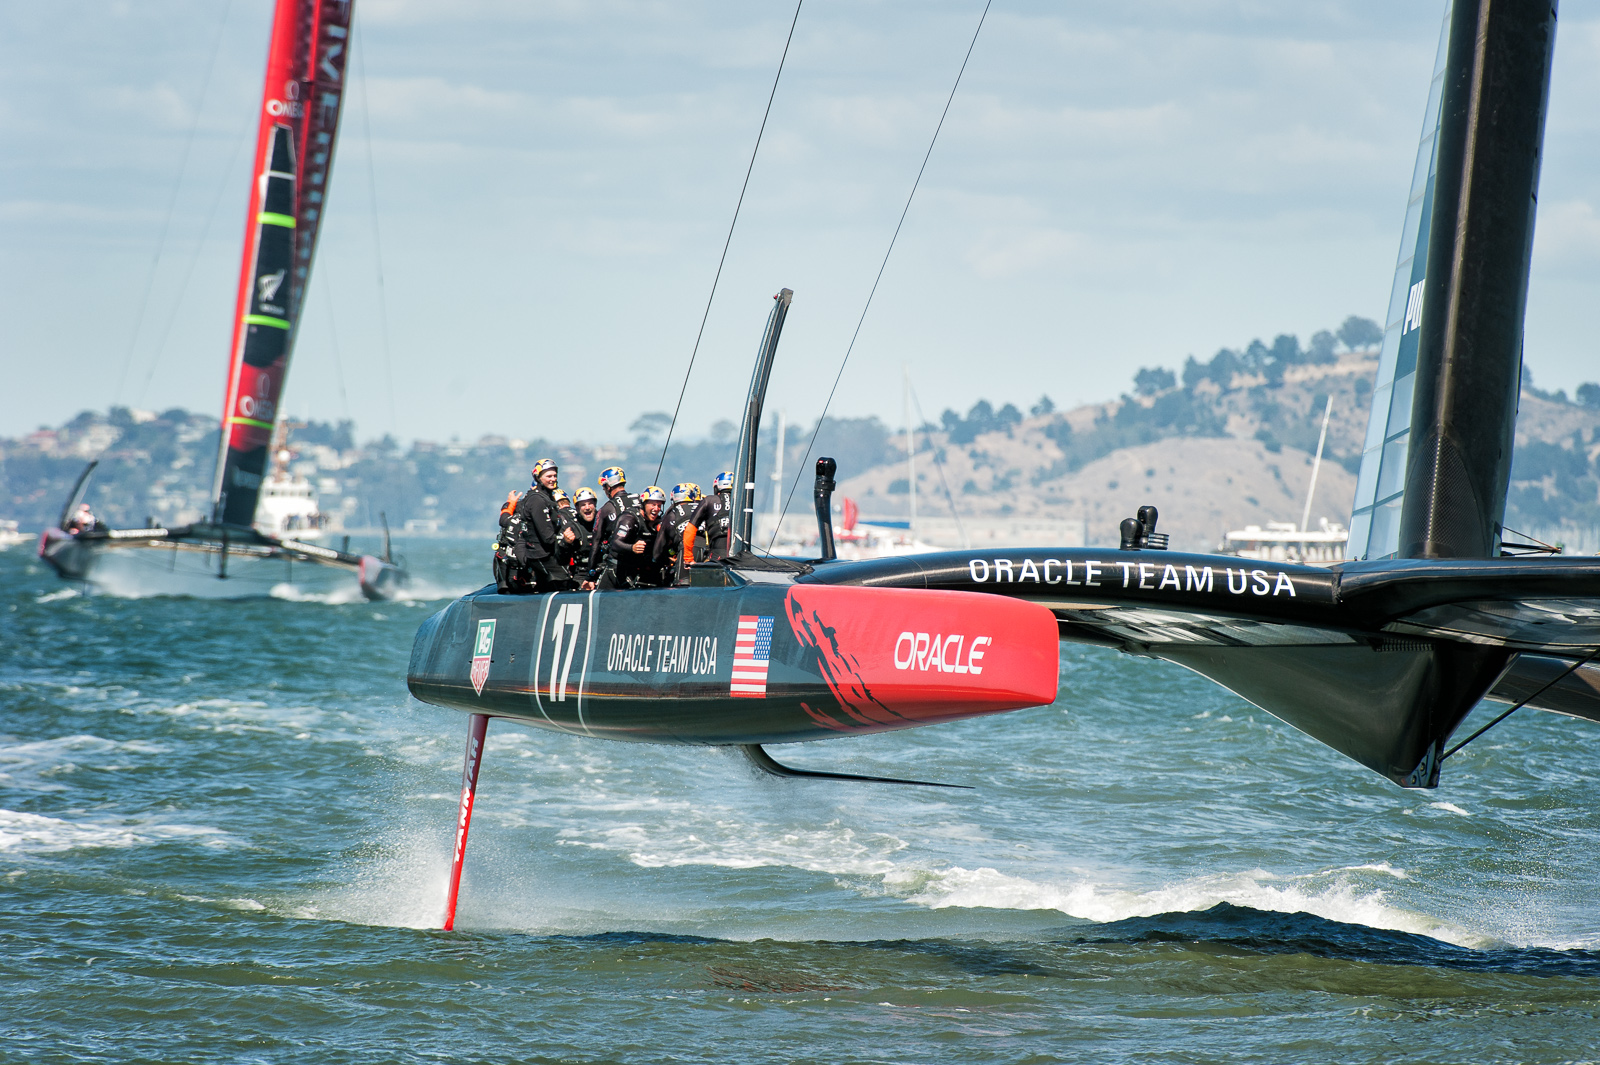 Oracle USA boat crosses the finish line ahead of New Zealand to win the final America's Cup race